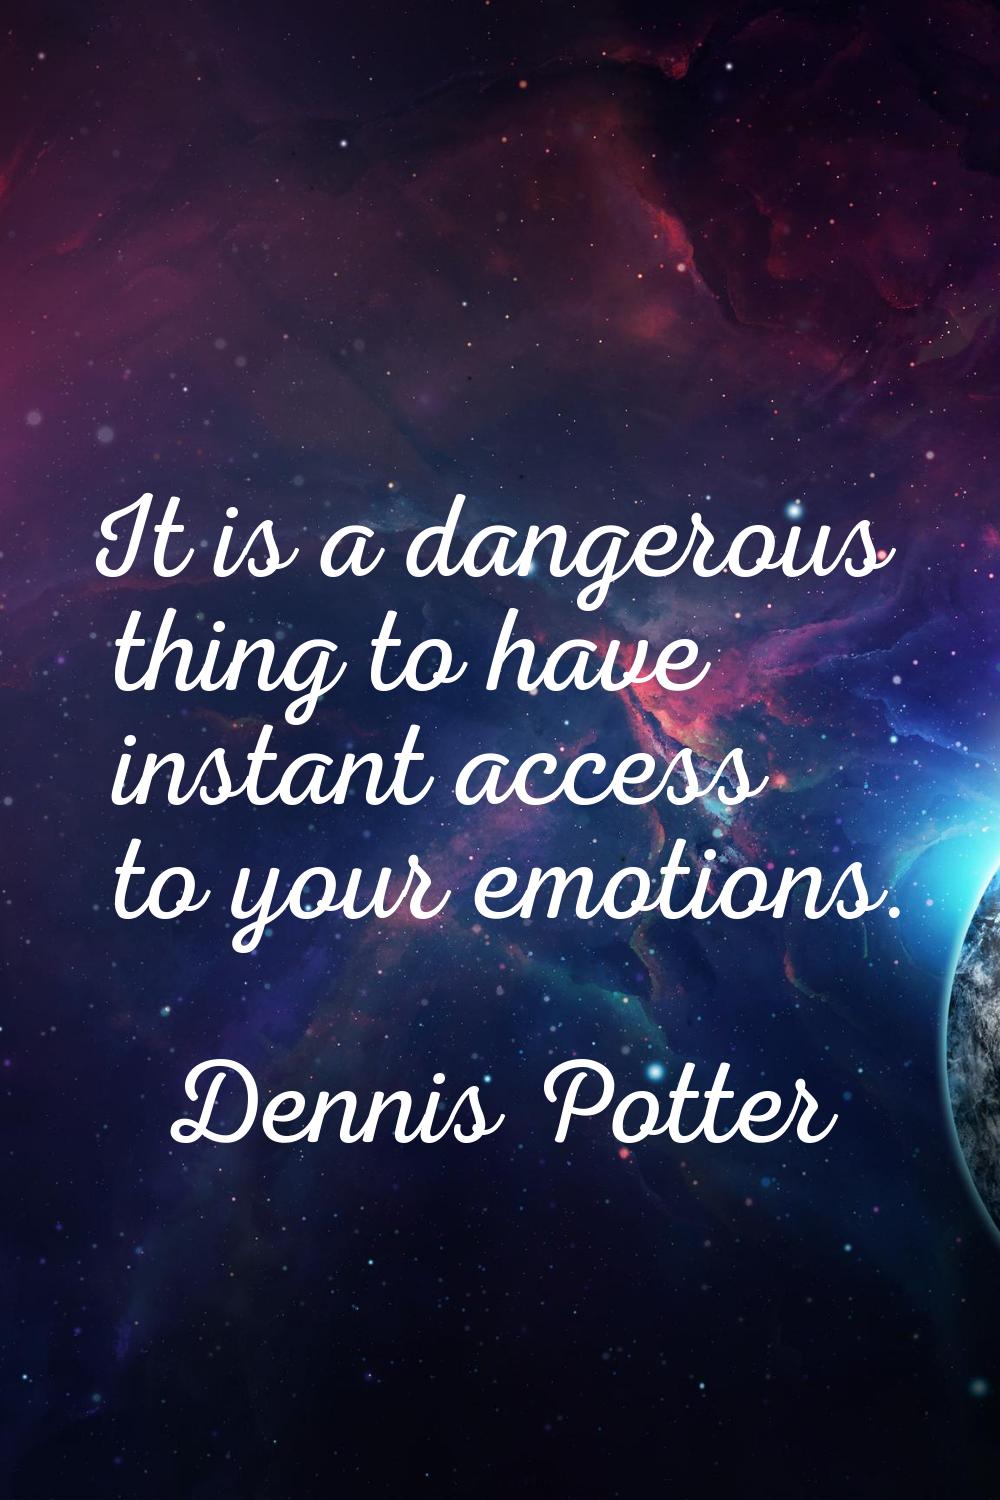 It is a dangerous thing to have instant access to your emotions.